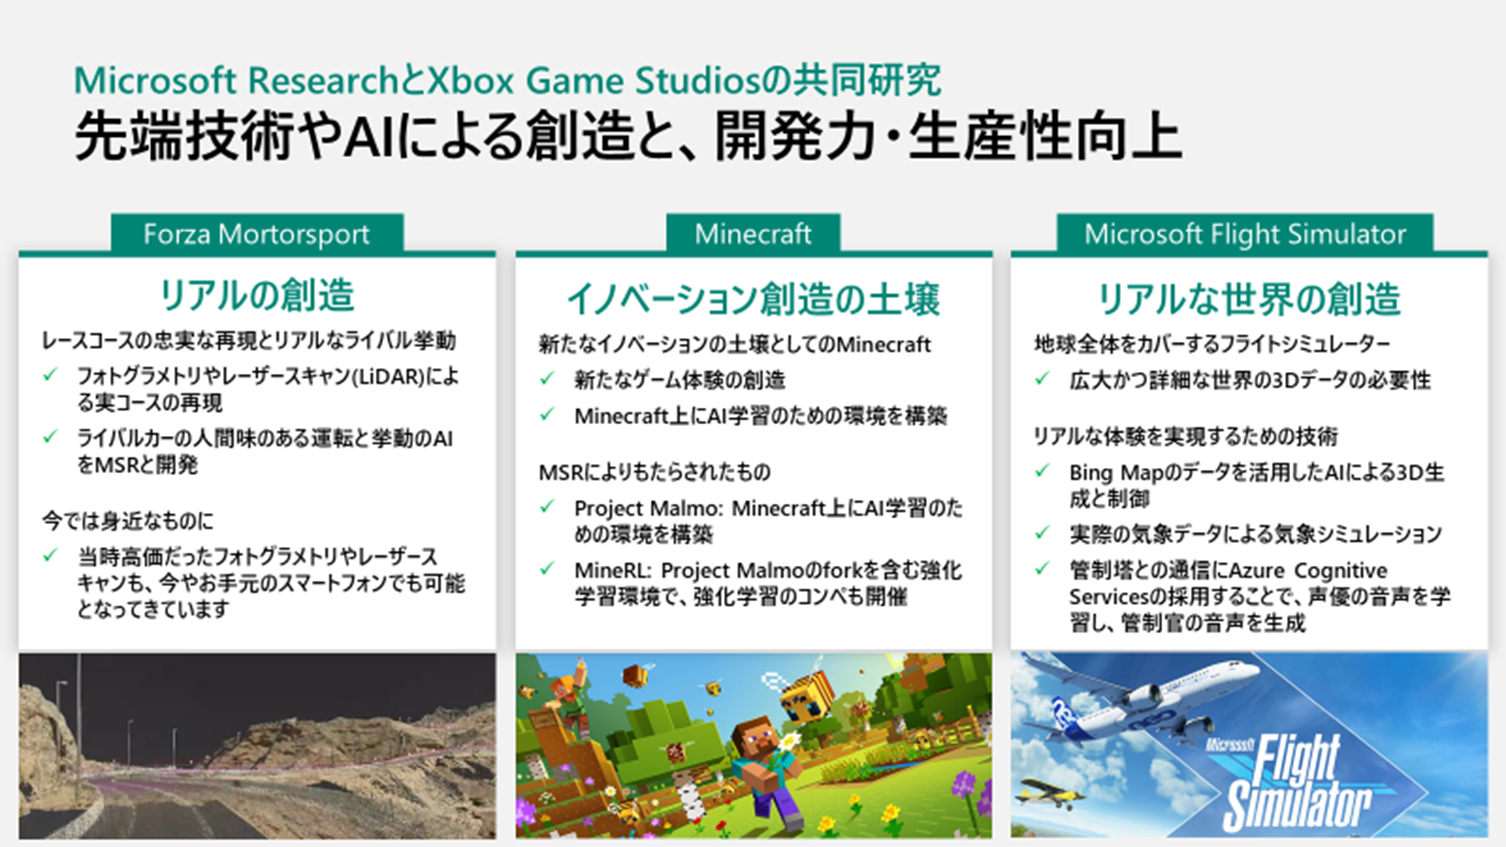 What’s next for Commercial Gaming industry in Japan